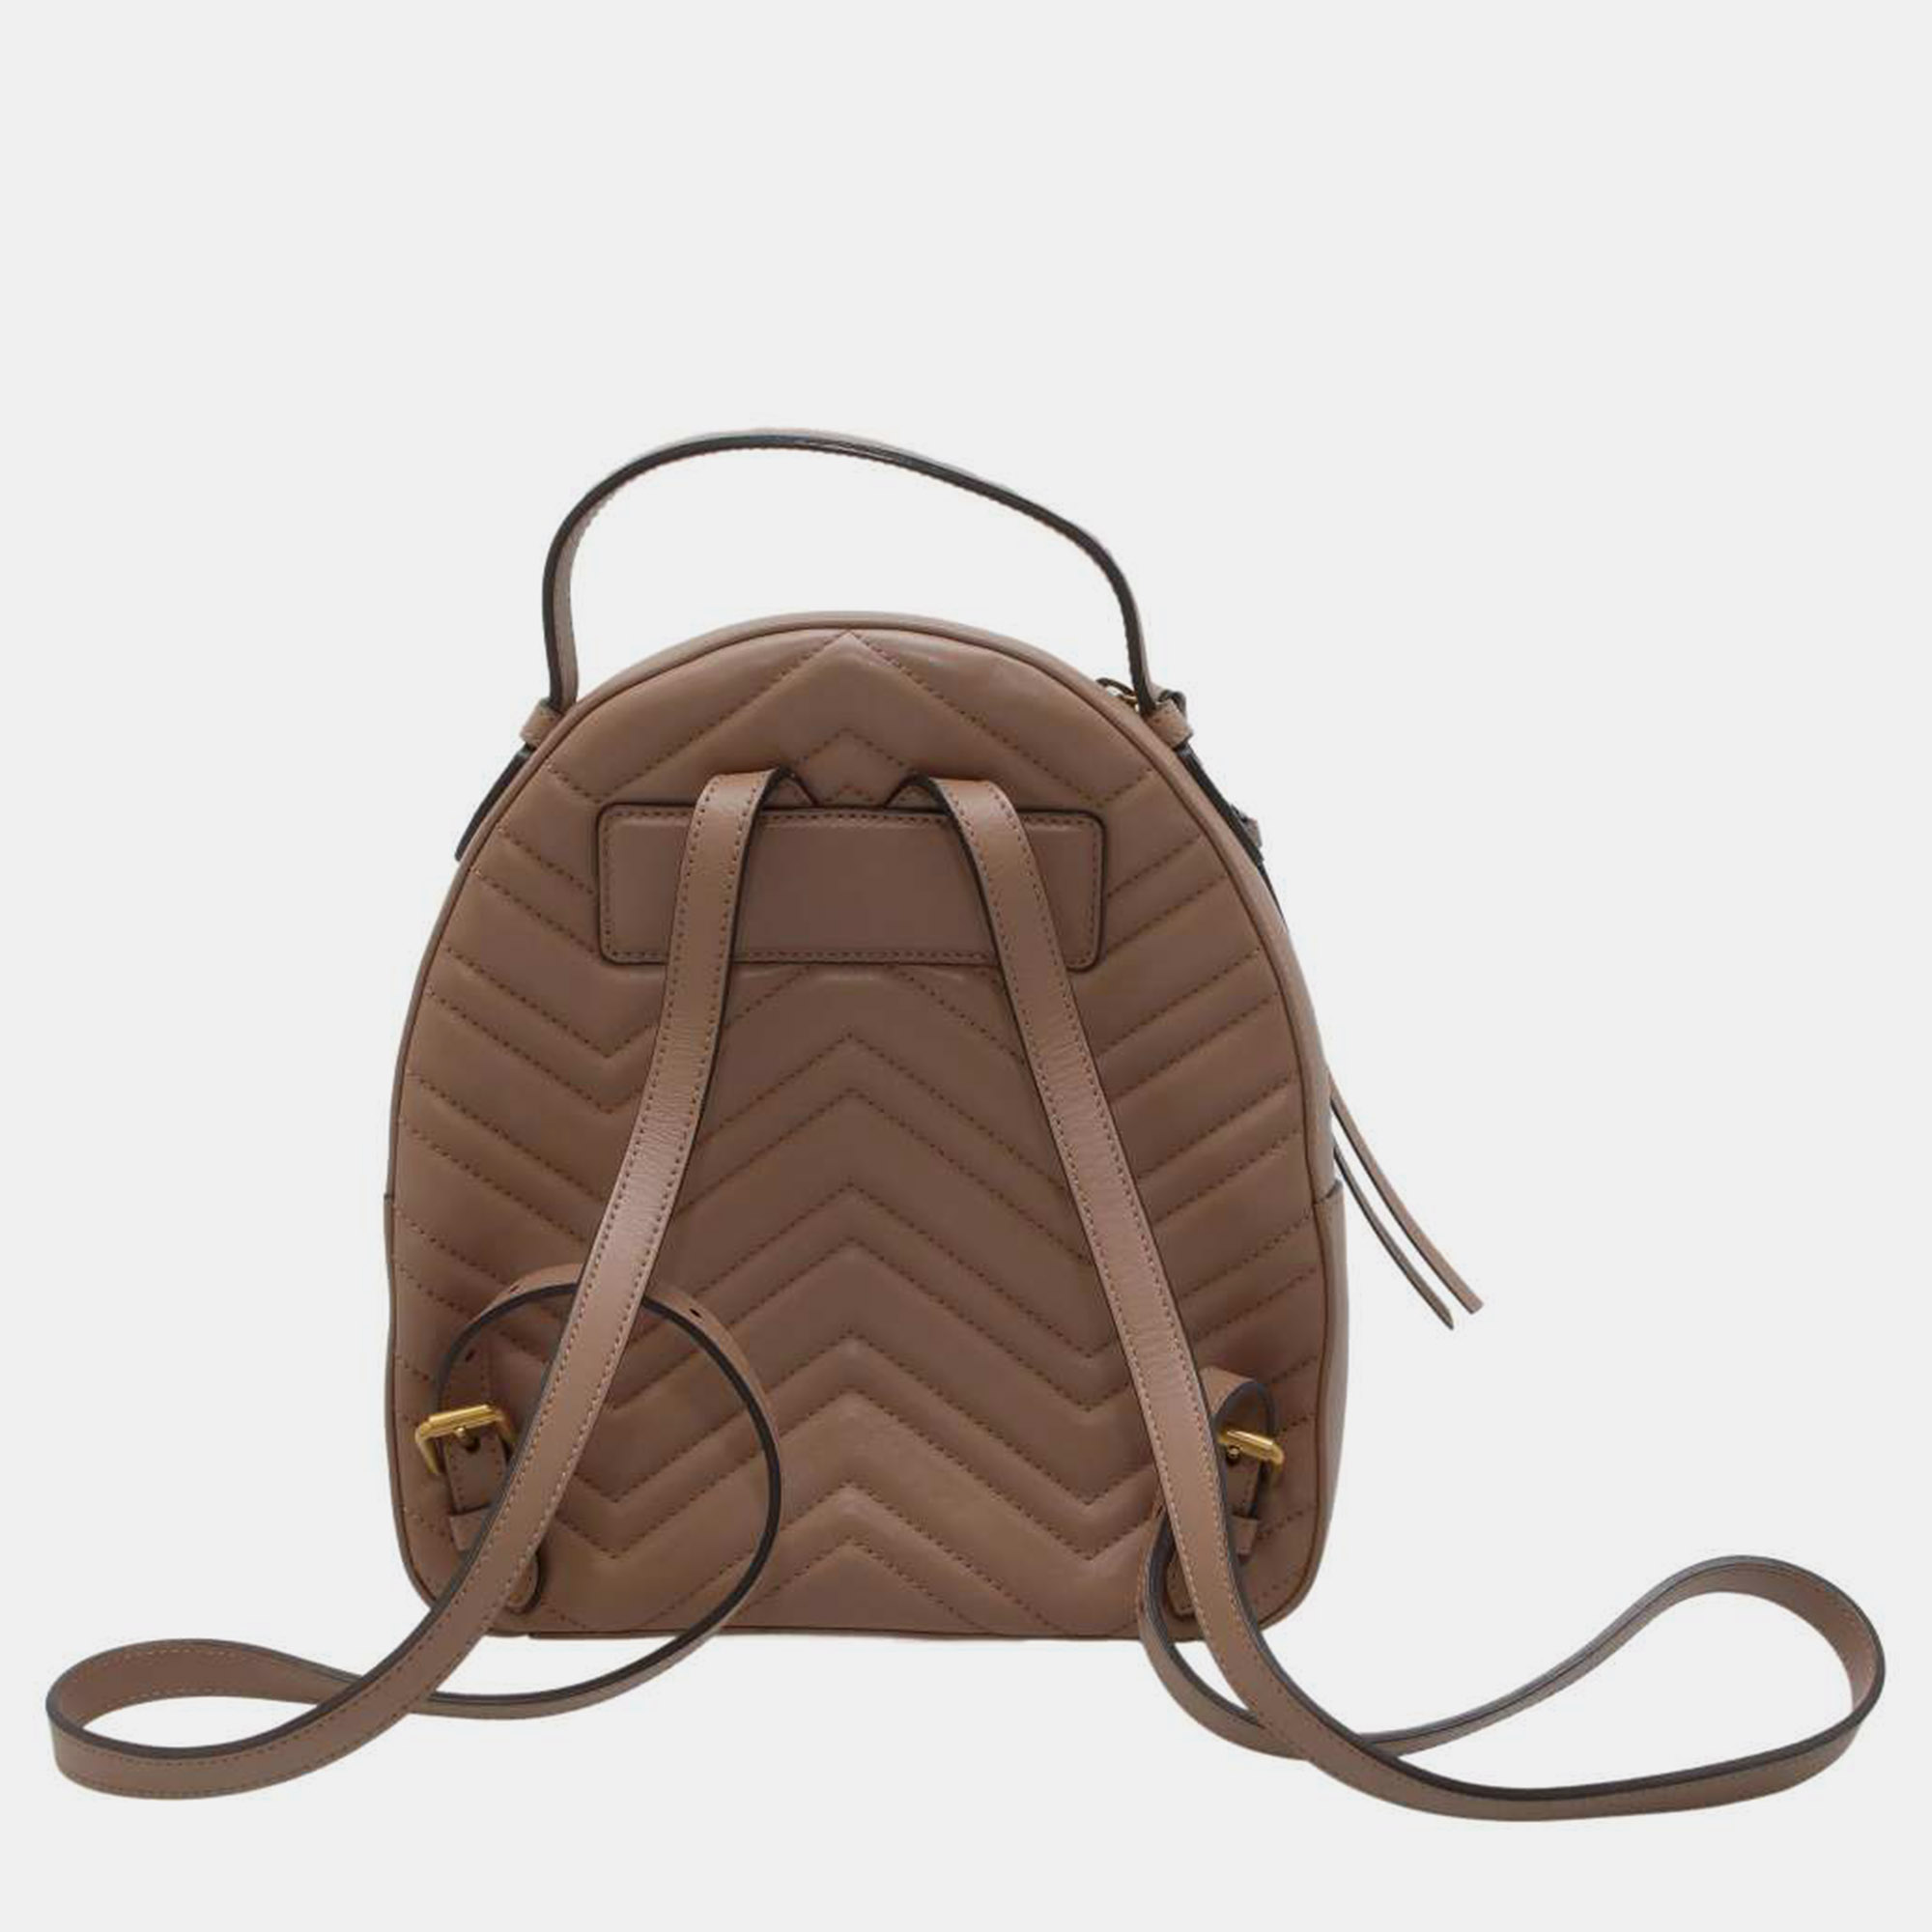 Gucci Beige Leather GG Marmont Backpack